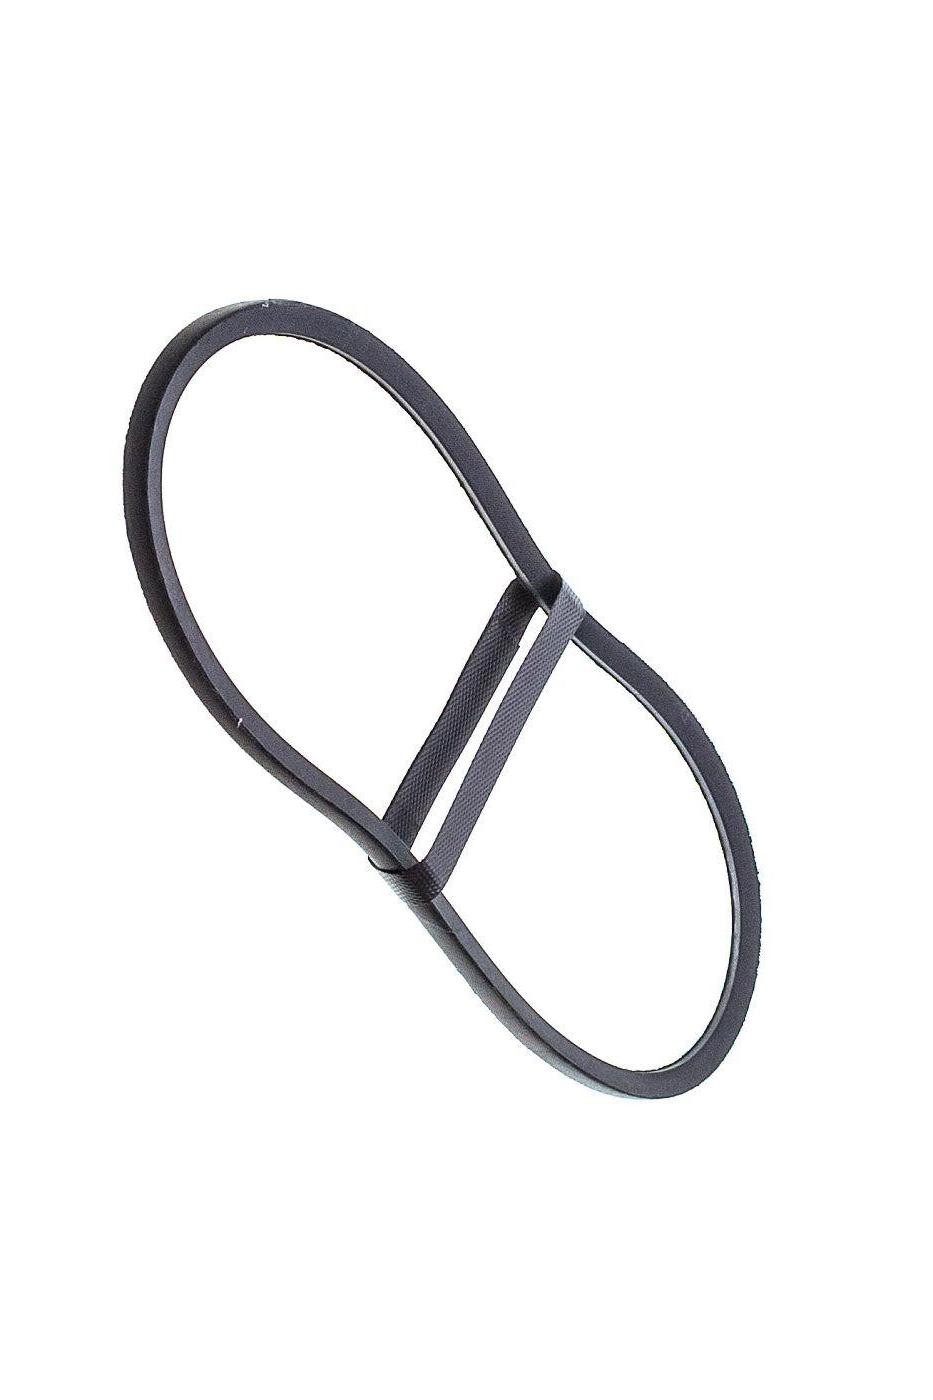 Windbreaker strap AL-KO width 10mm,inner length 774mm, outer length 825mm, 19-09007, 474832 AL-KO, BOSCH ROTAK, GARDENA Spare parts for trimmers, trimmers, saws, water pumps and hydrophores